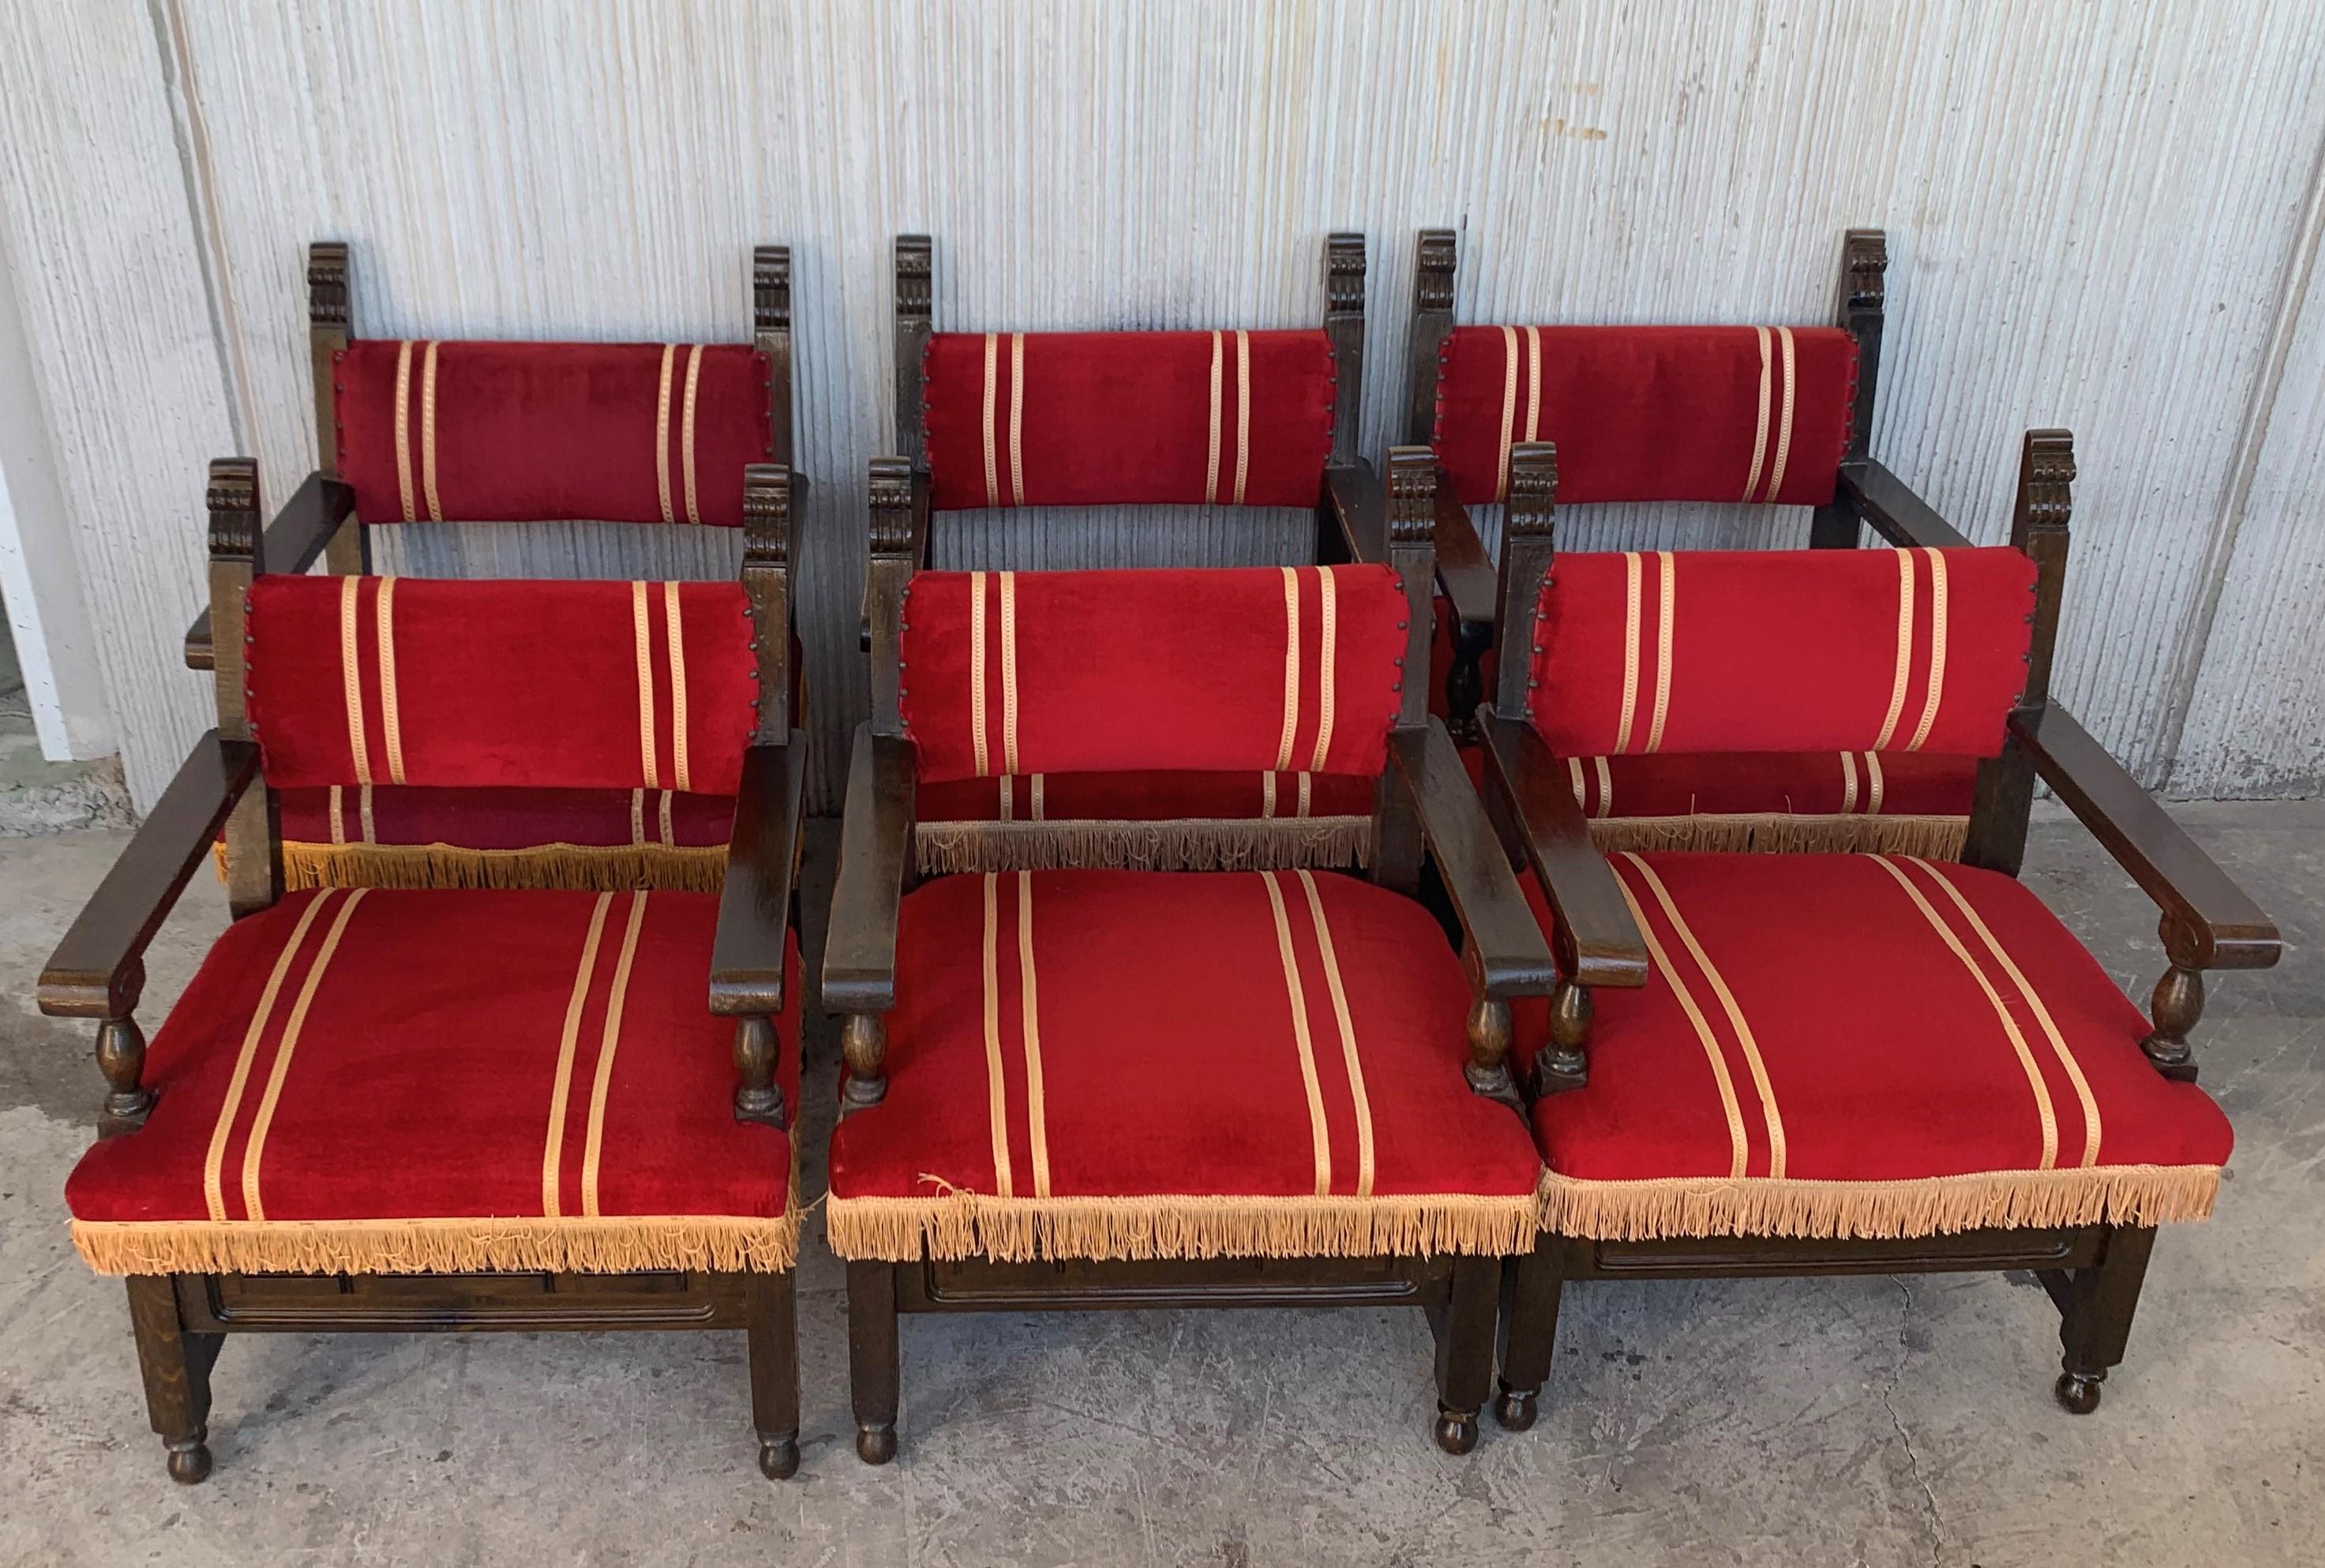 Spanish Colonial Set of 46 Spanish Low Armchairs in Carved Walnut and Red Velvet Upholstery